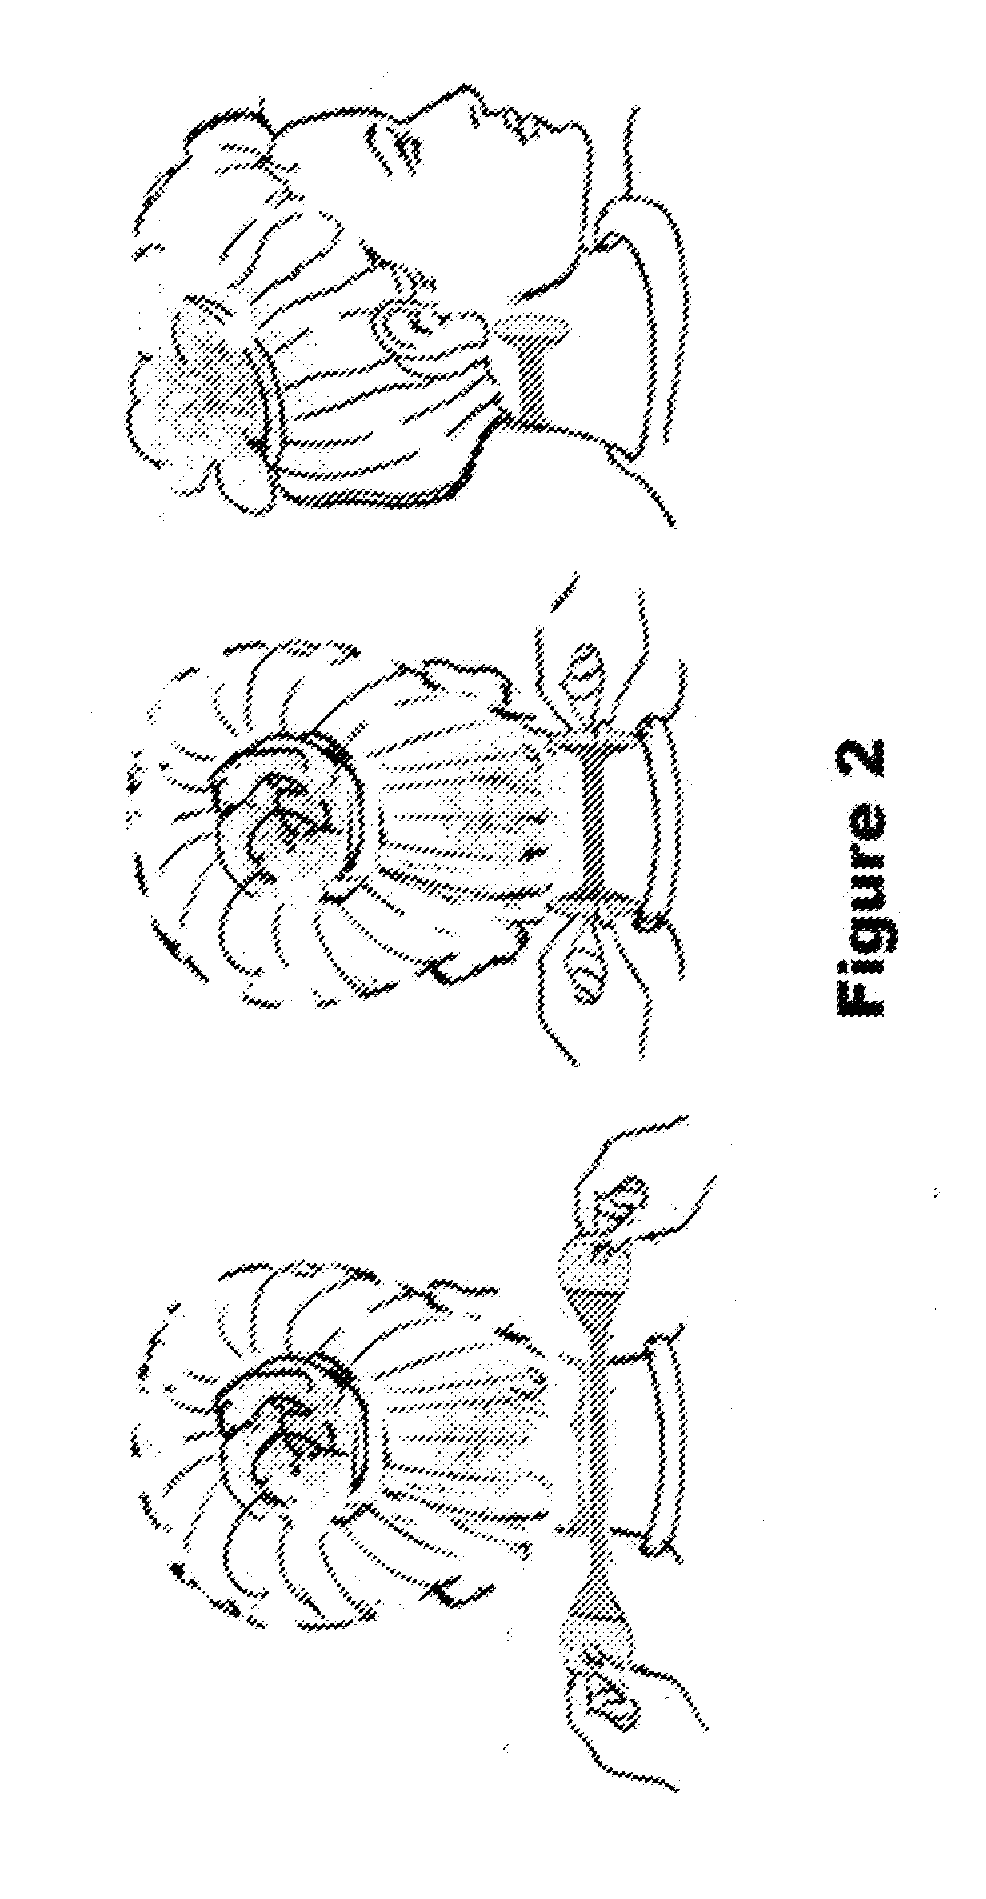 Face lifting device for face and neck